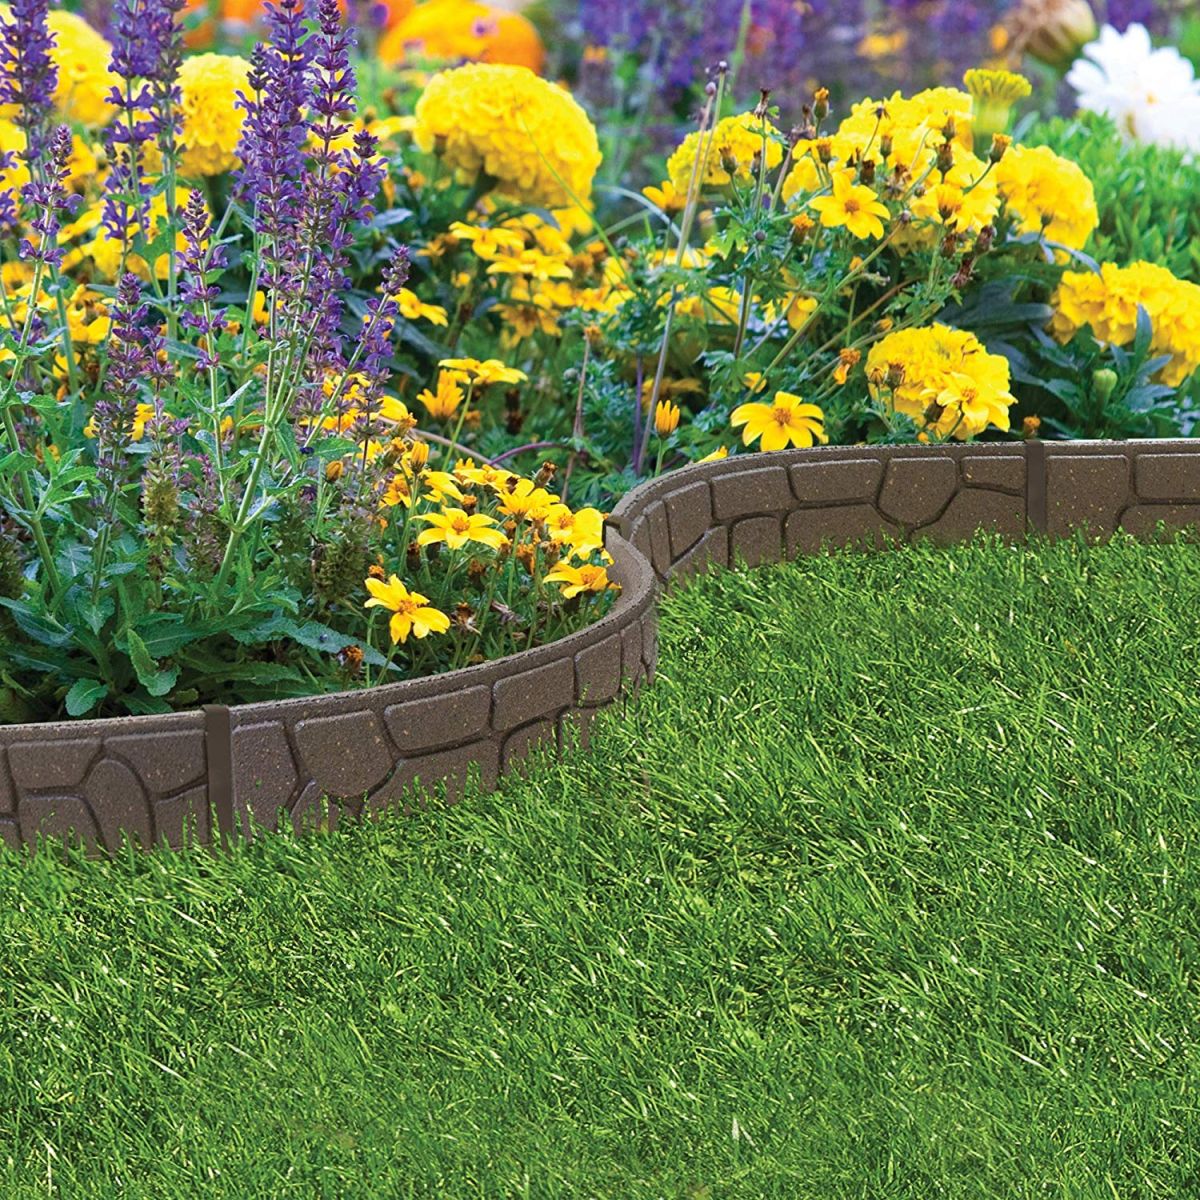 17 Garden Borders And Edging Ideas You Must Look Sharonsable 